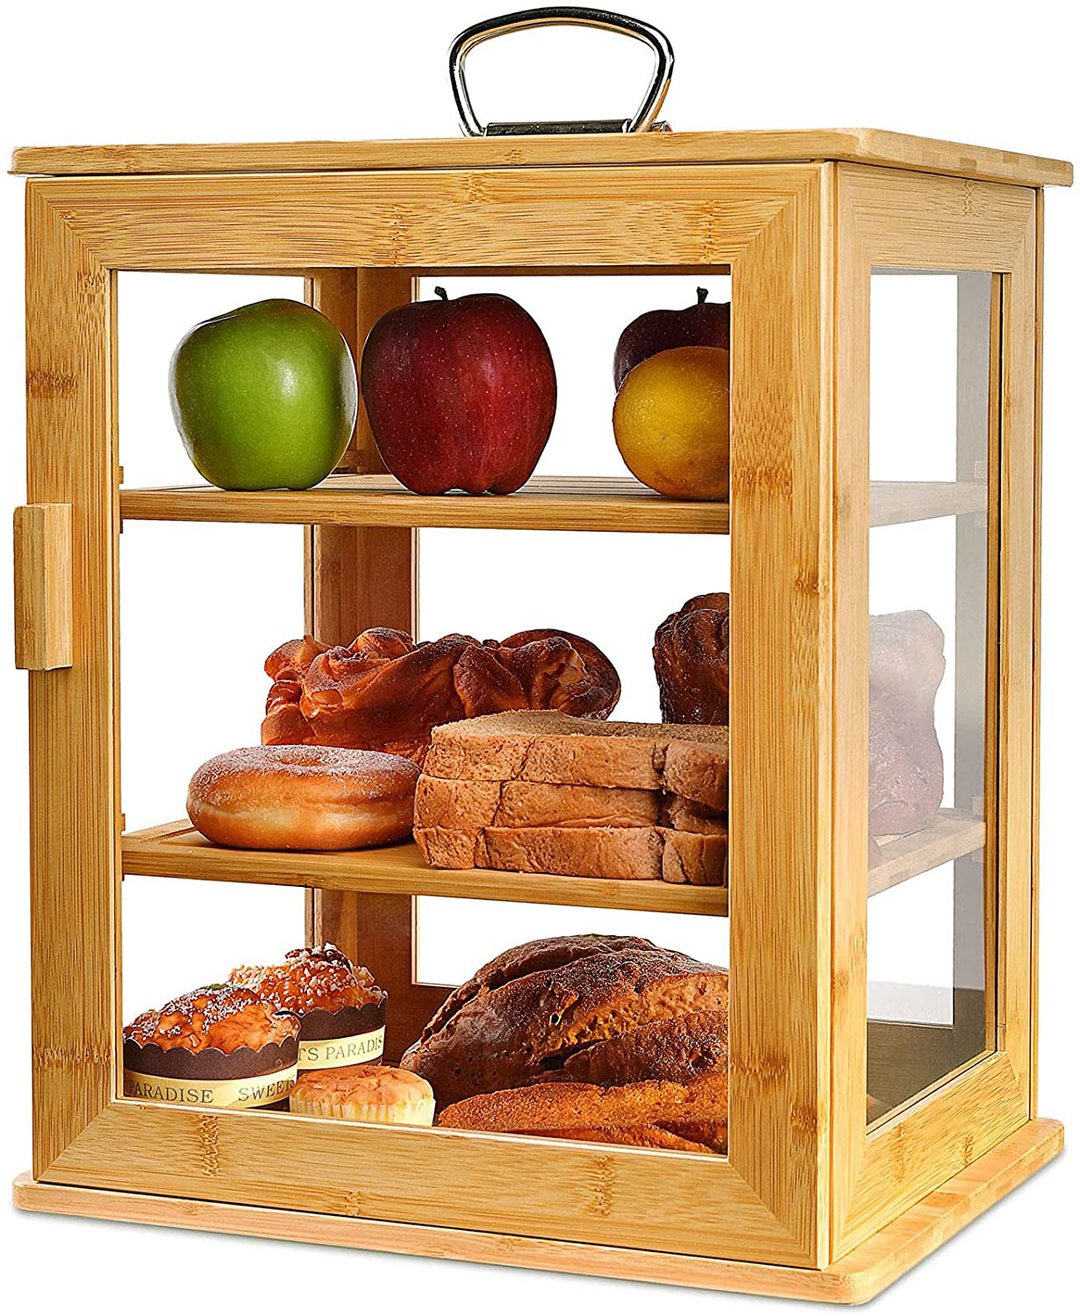 Kreemox 3 Layer Large Bread Box for Kitchen Countertop - Portable Bamboo Breadbox with All Clear Windows and Adjustable Shelves - Farmhouse Wood Bread Boxes Storage Holder (Self-Assembly)